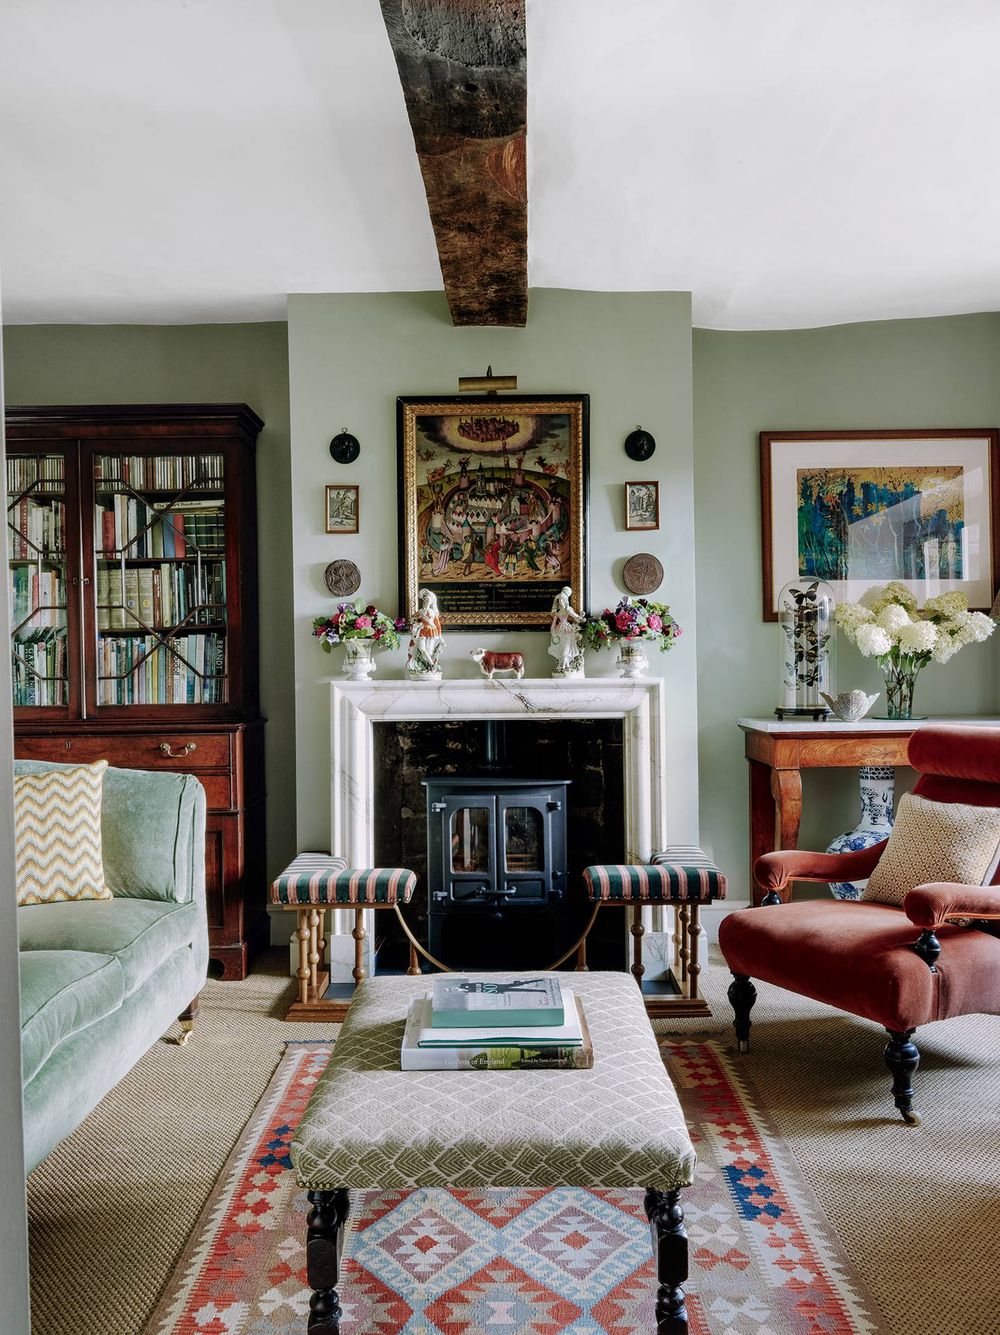 English Country Living Room With Fireplace Mantel Via Charles O’Connor And Edward Greenall House And Garden 